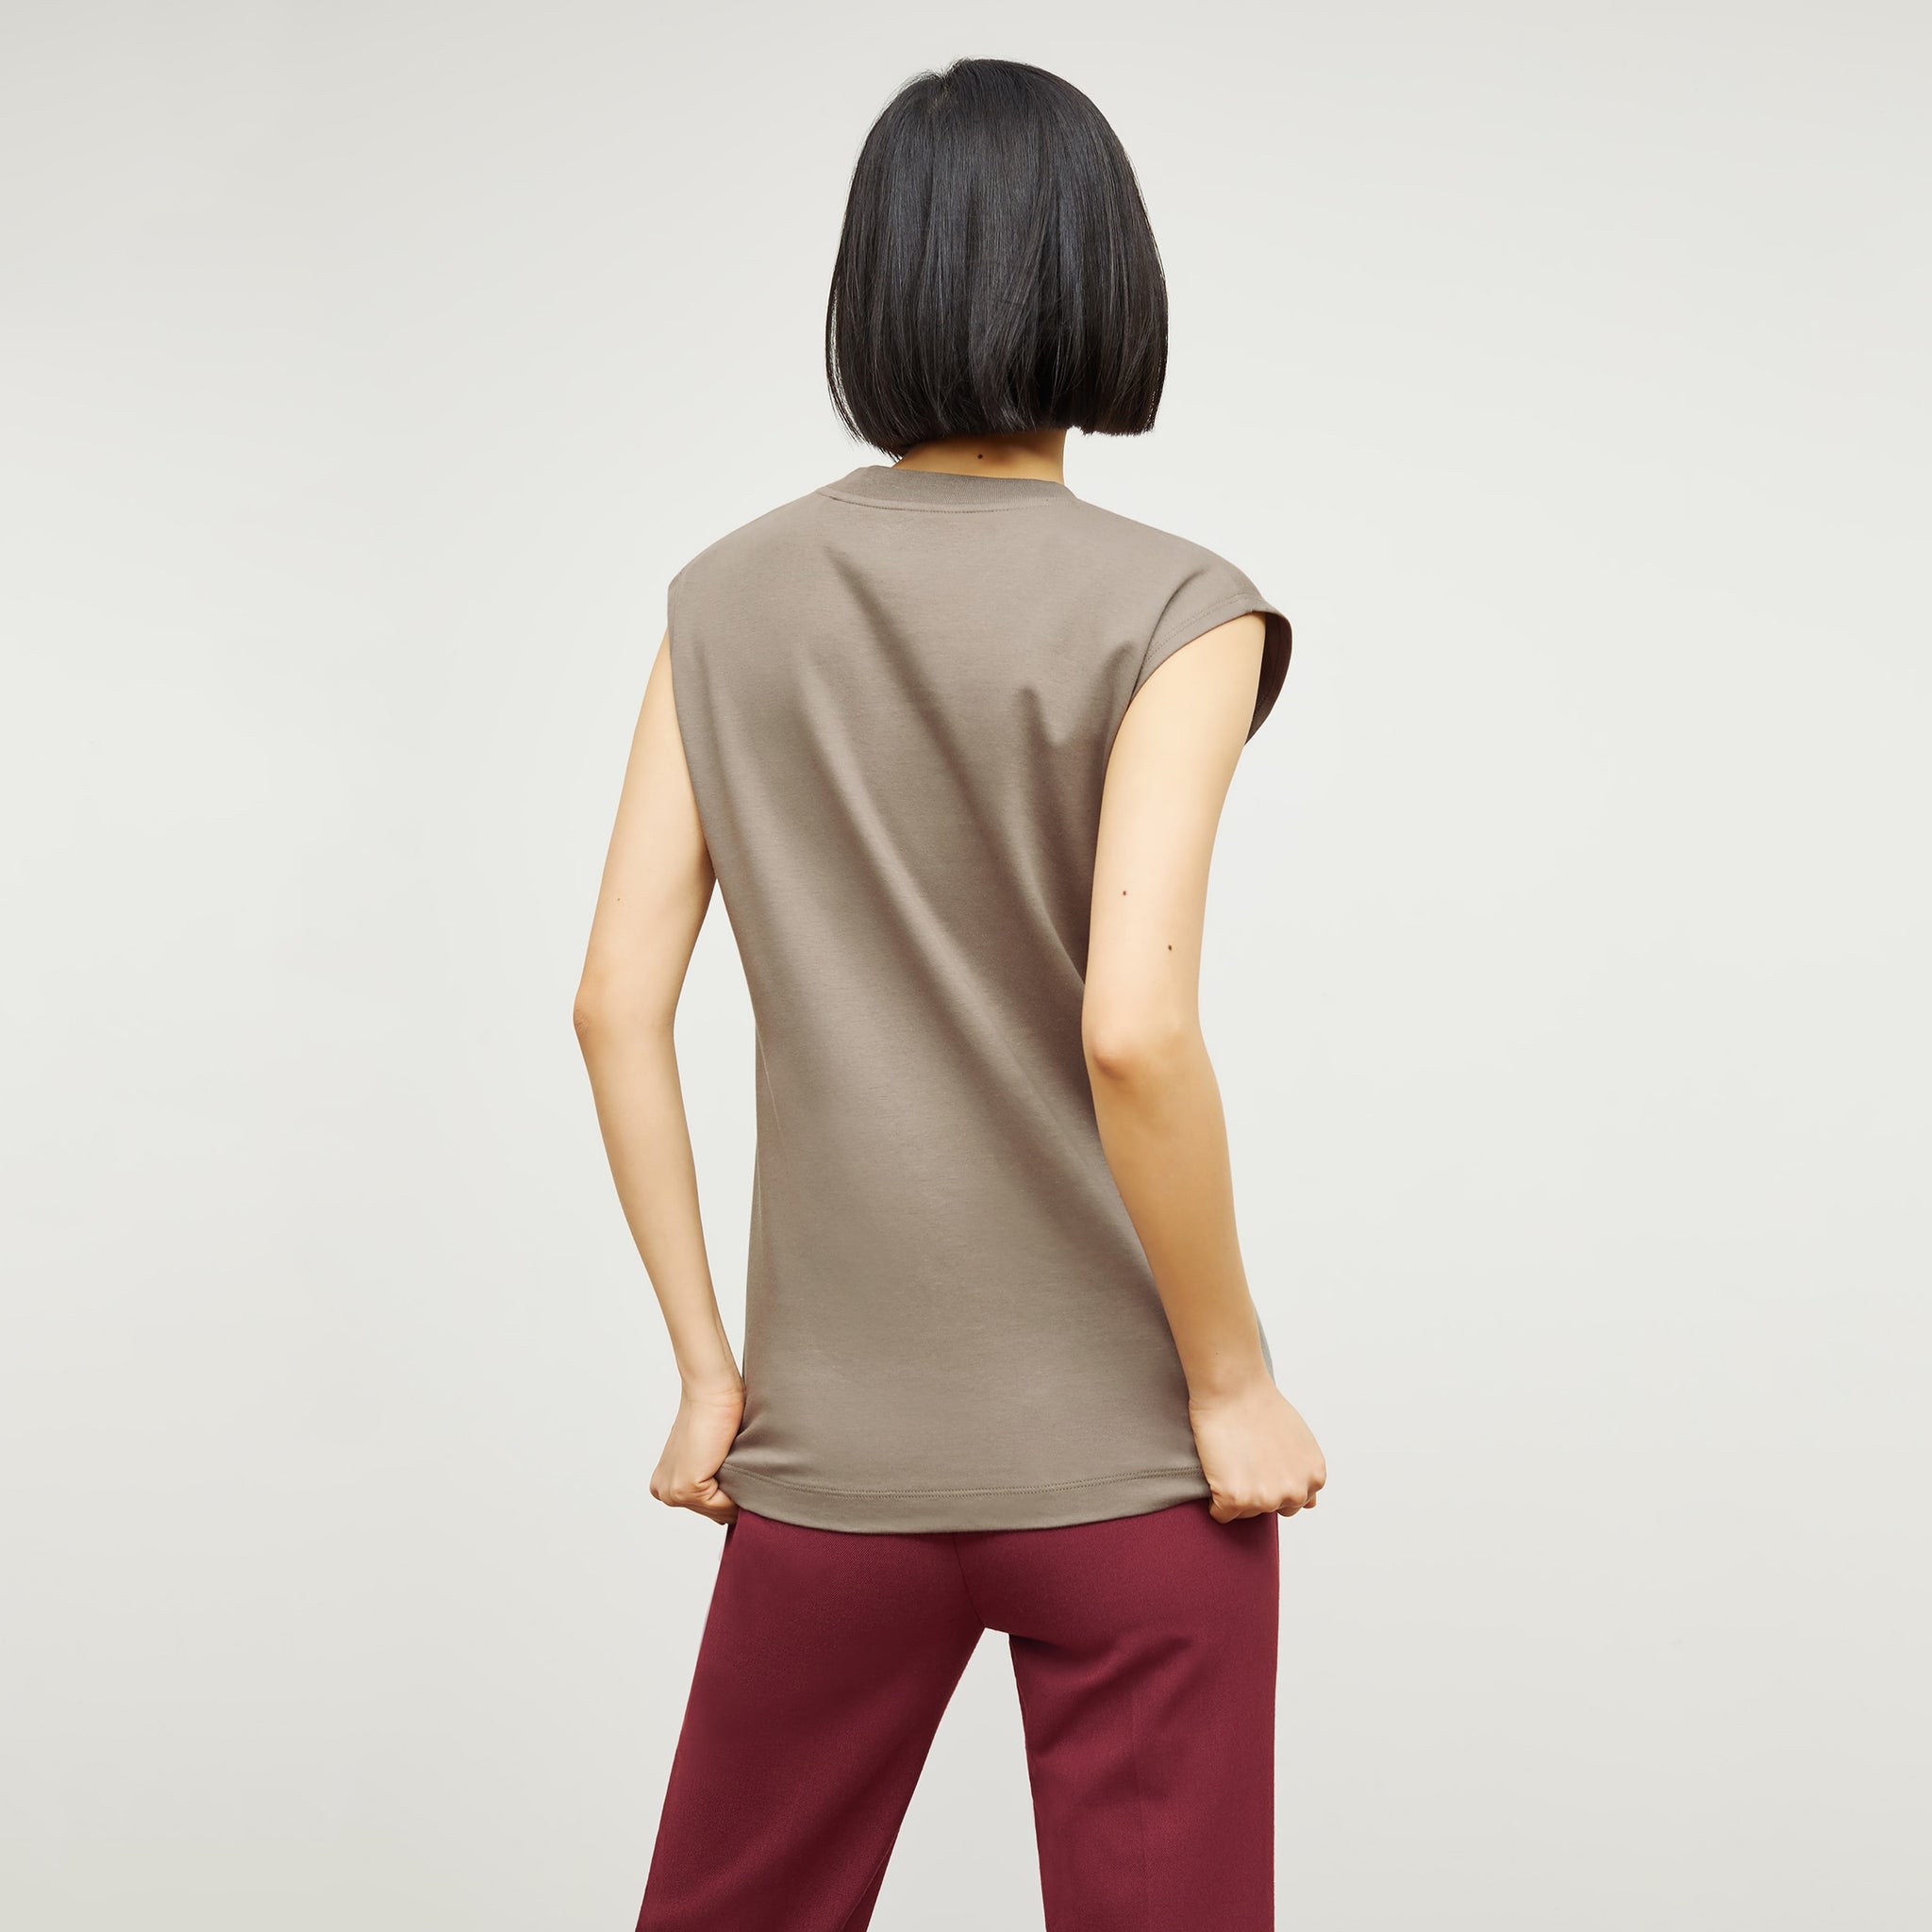 Back image of a woman standing wearing the Alina T-Shirt—Compact Cotton in Pebble